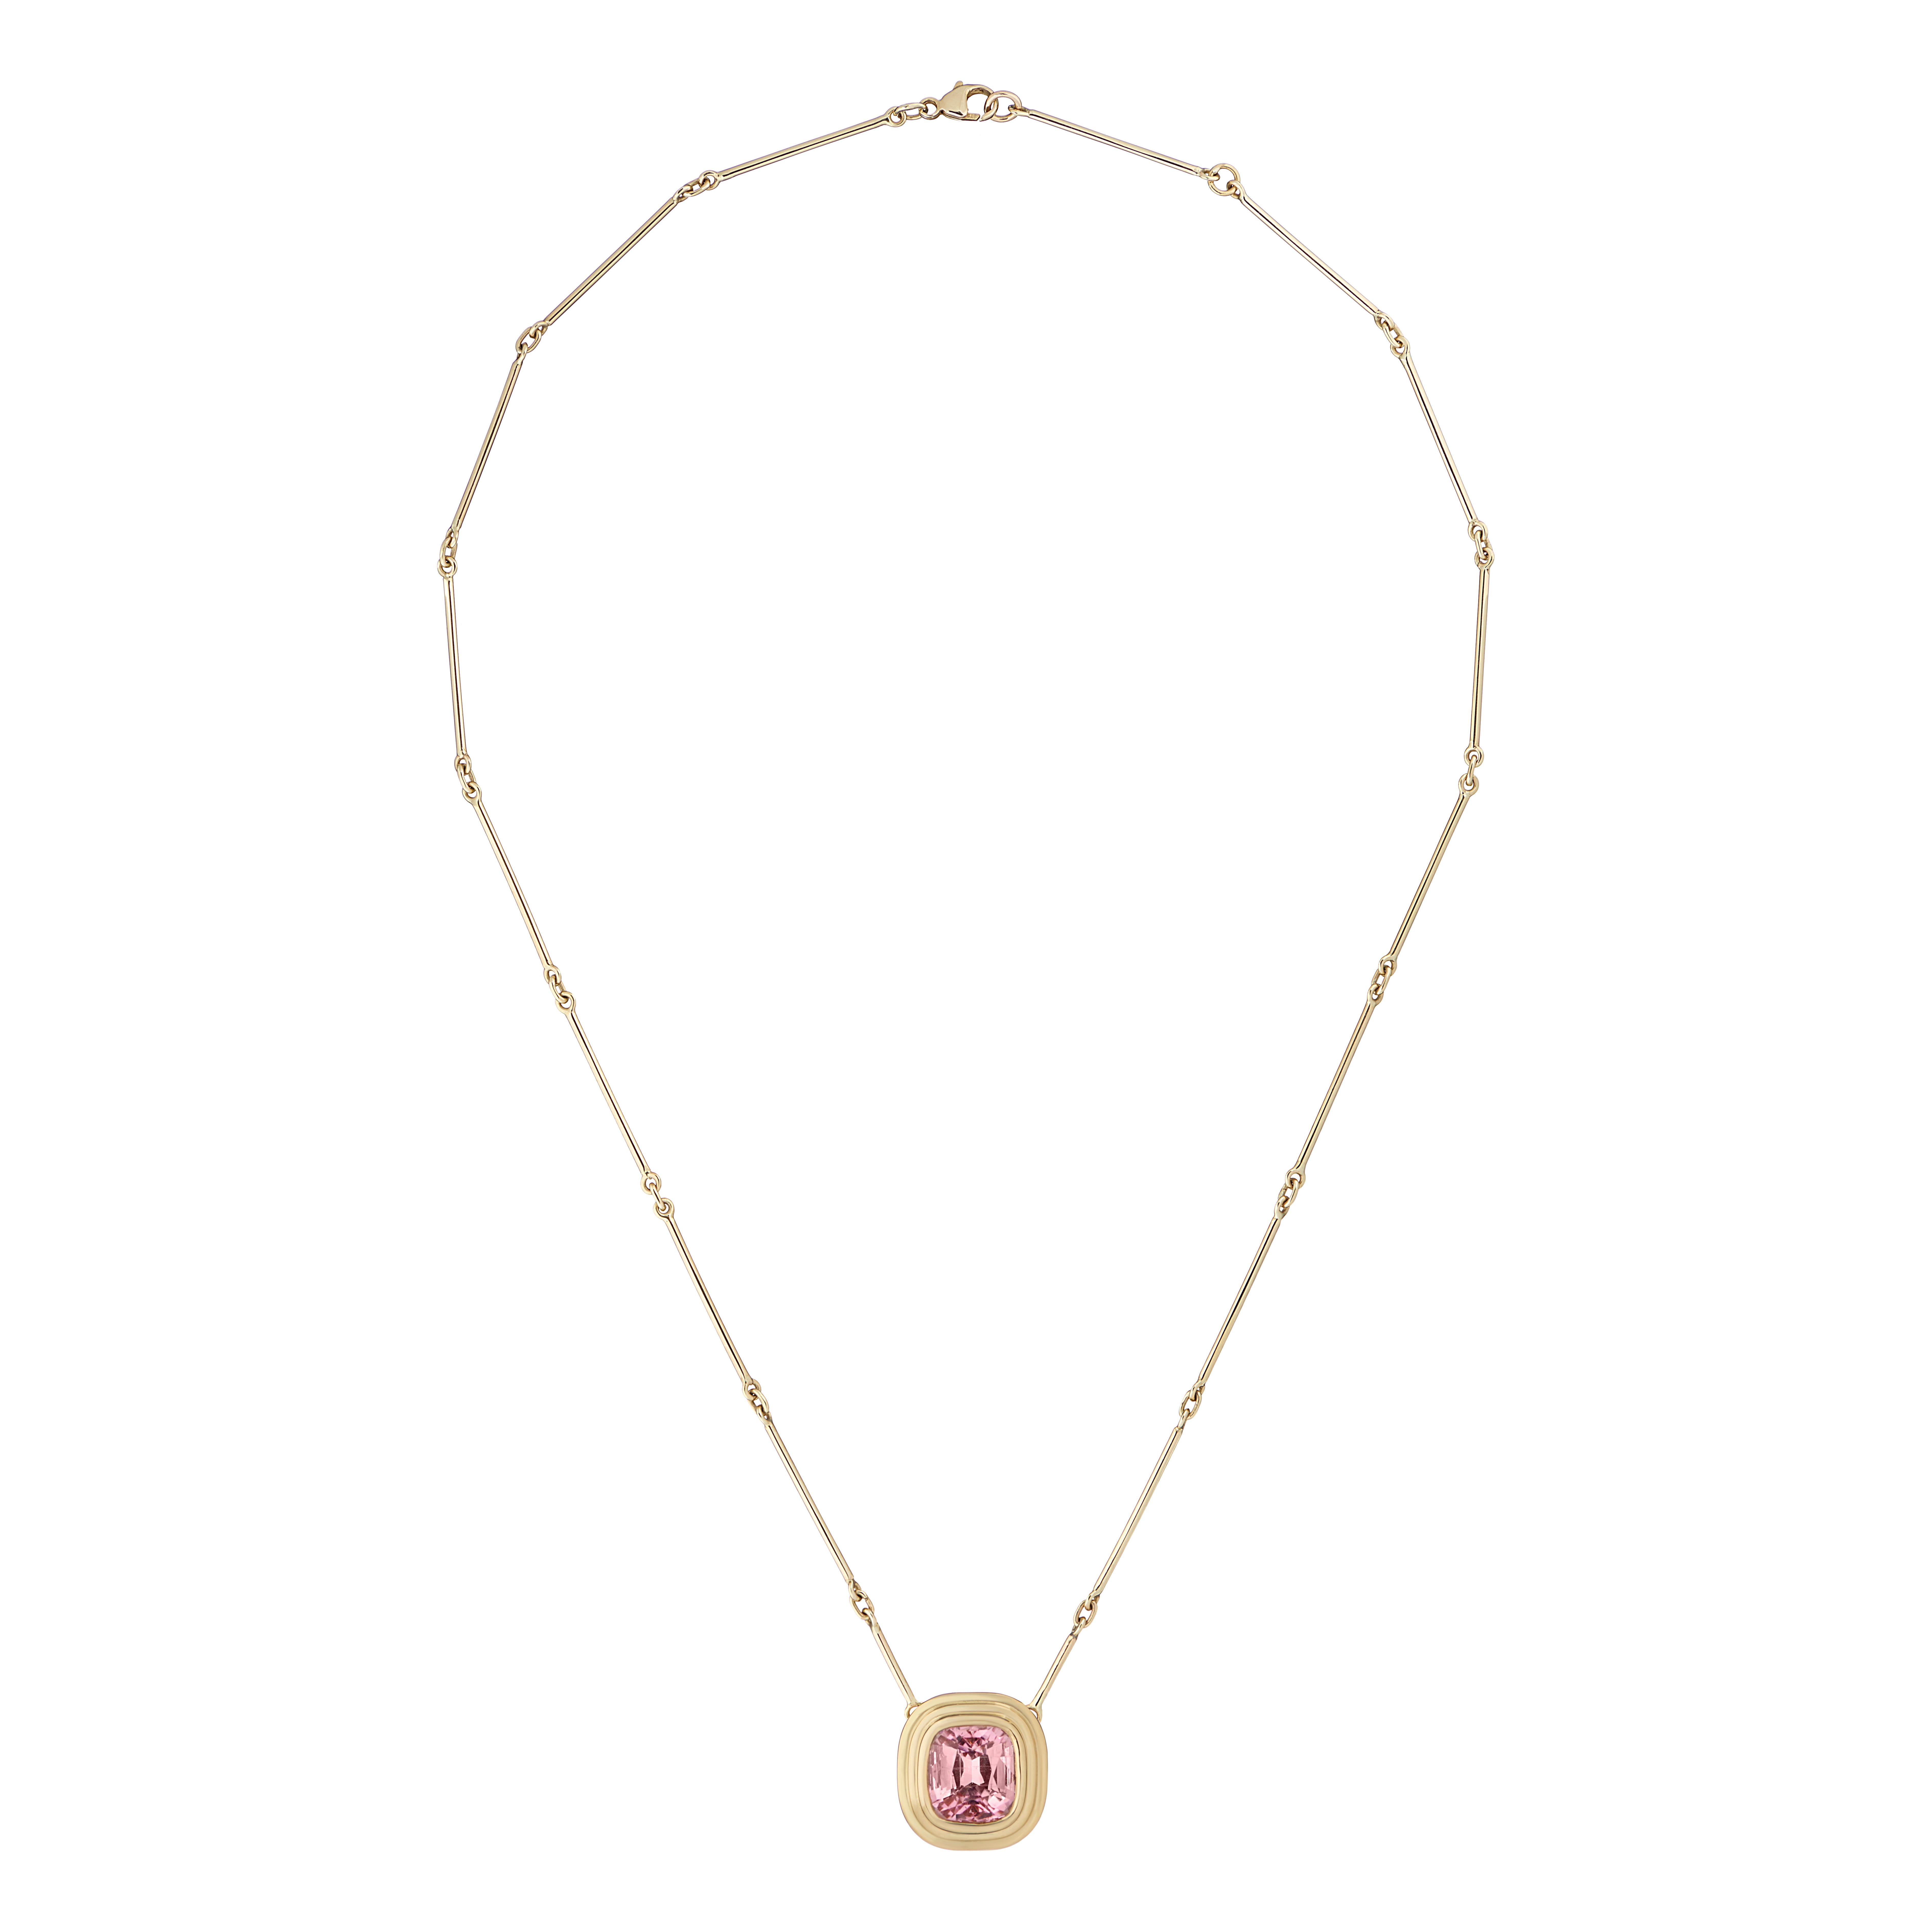 Athena collection: Pink Tourmaline 1.24ct cushion set in 18k yellow gold on our signature 18k yellow gold bar chain necklace. 

Length: 18